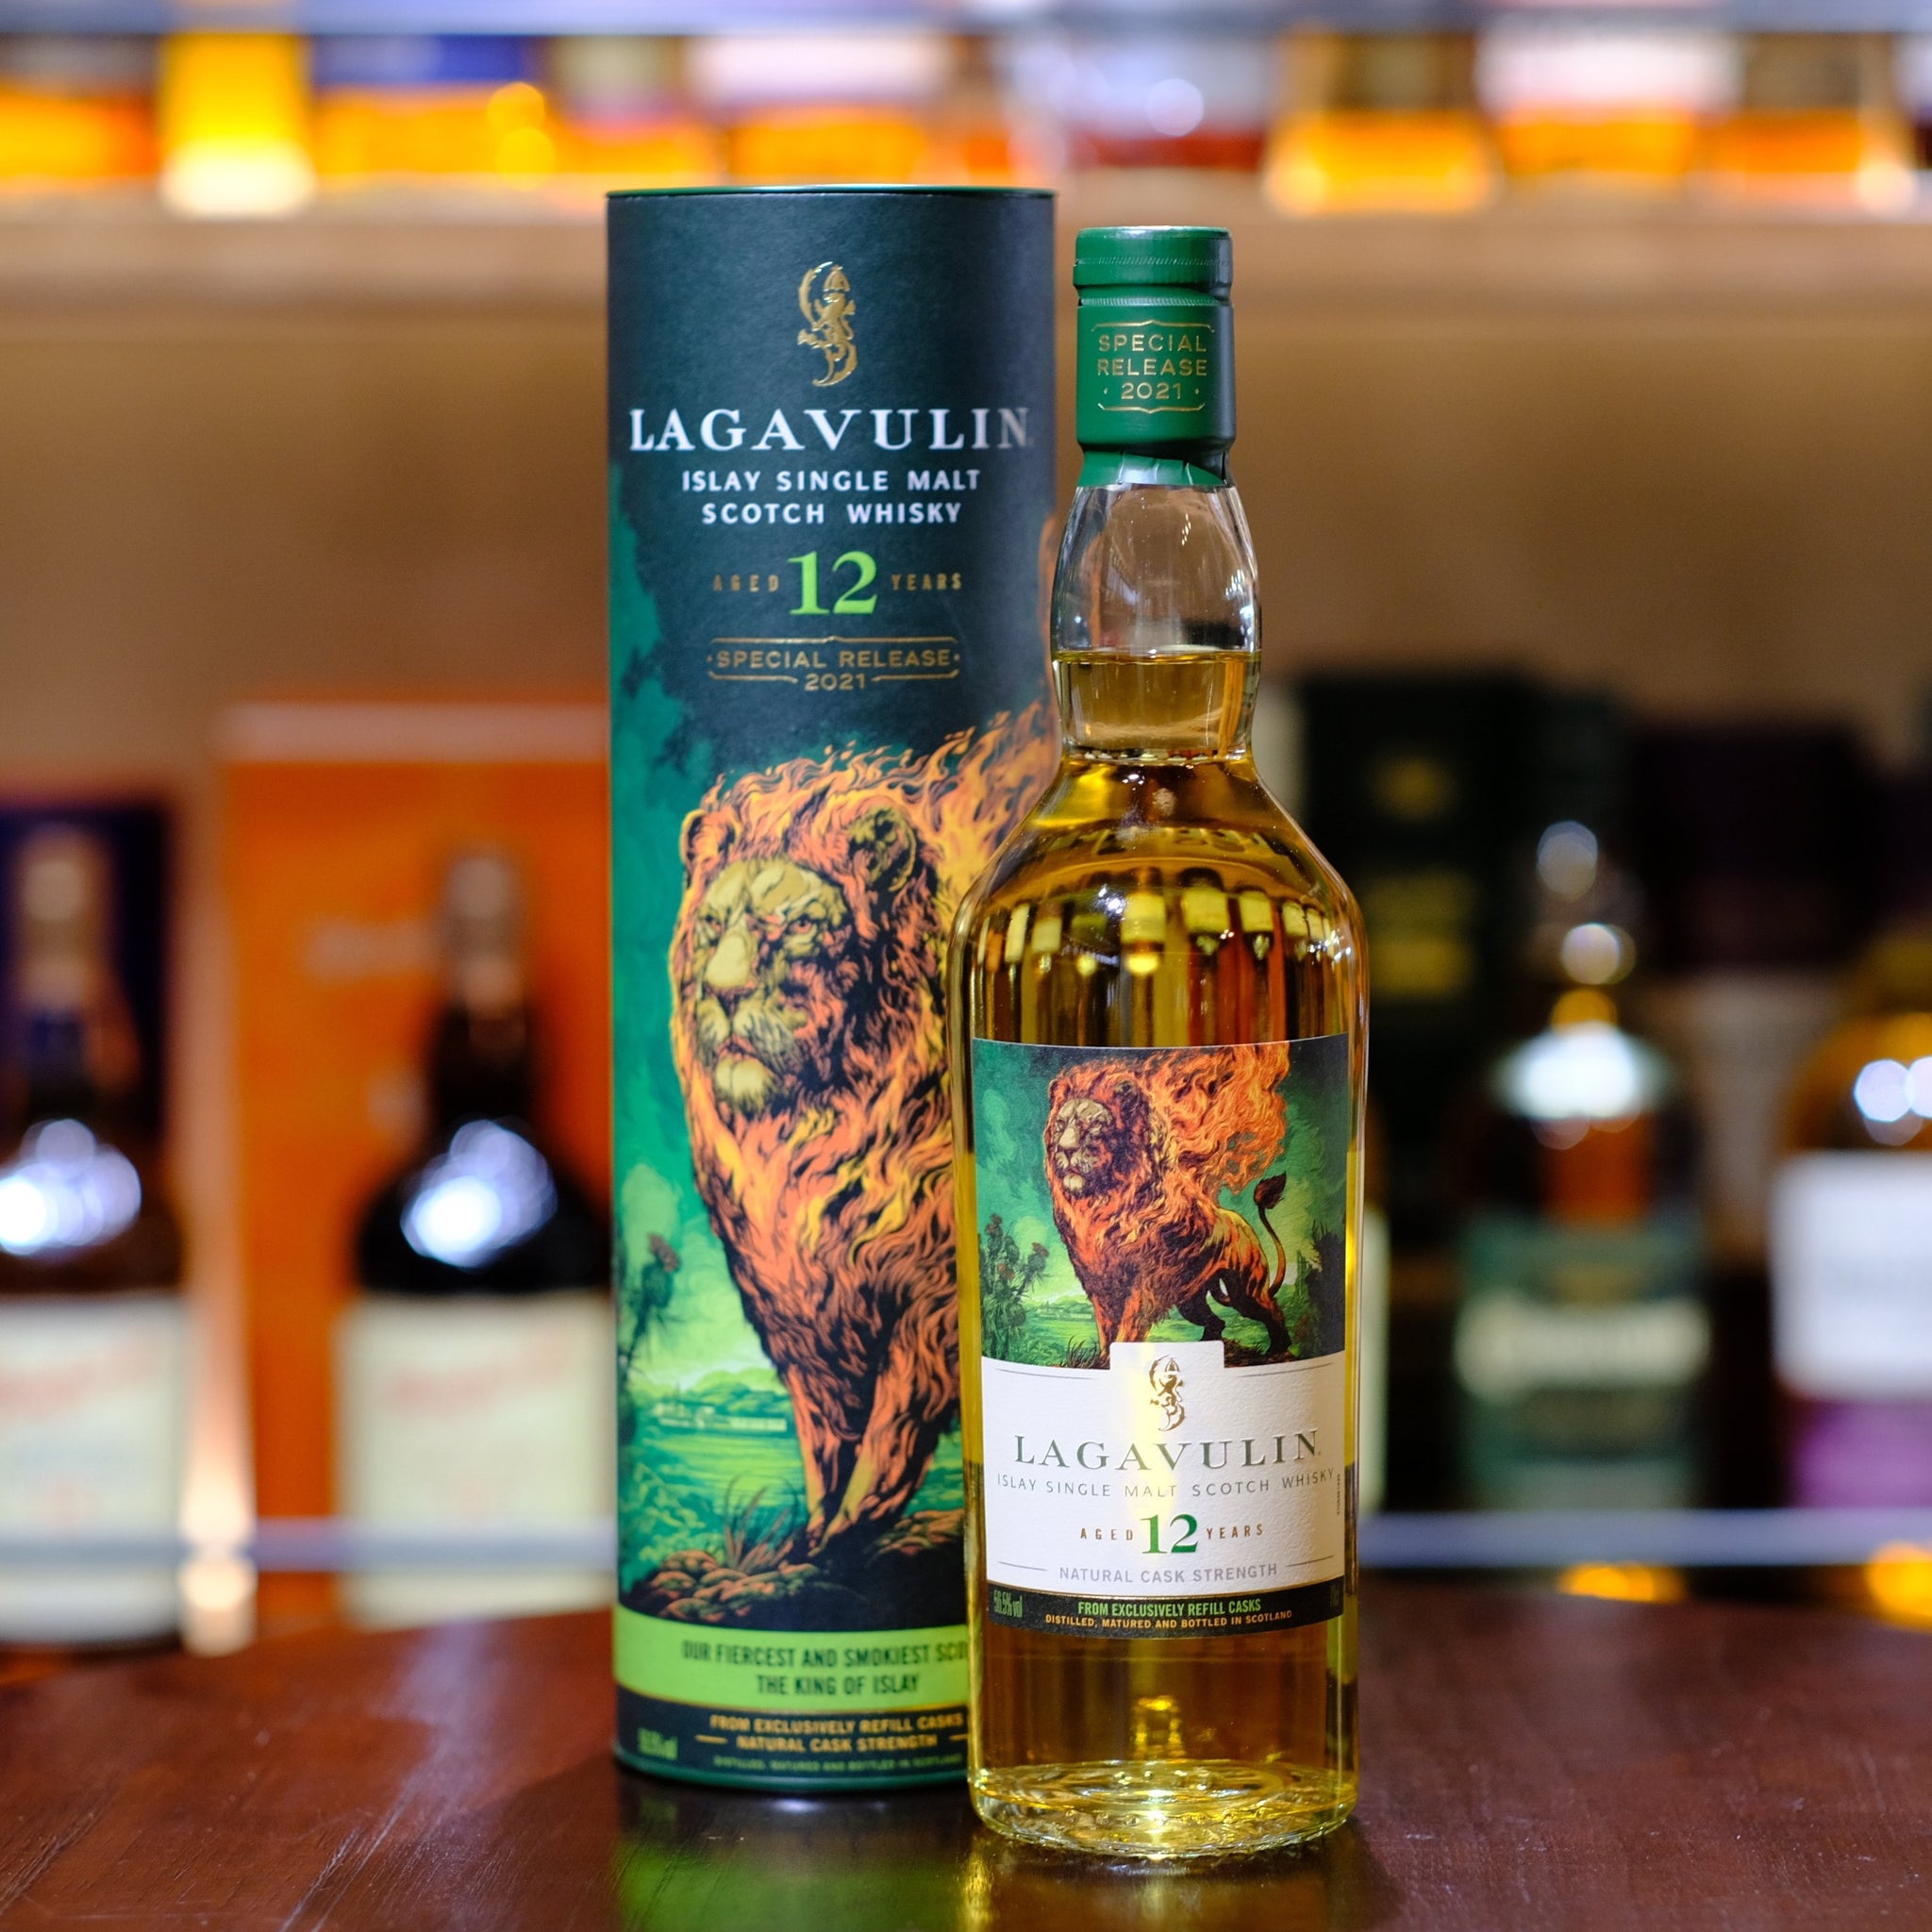 Lagavulin 12 Year Old 2021 Special Release Single Malt Scotch Whisky